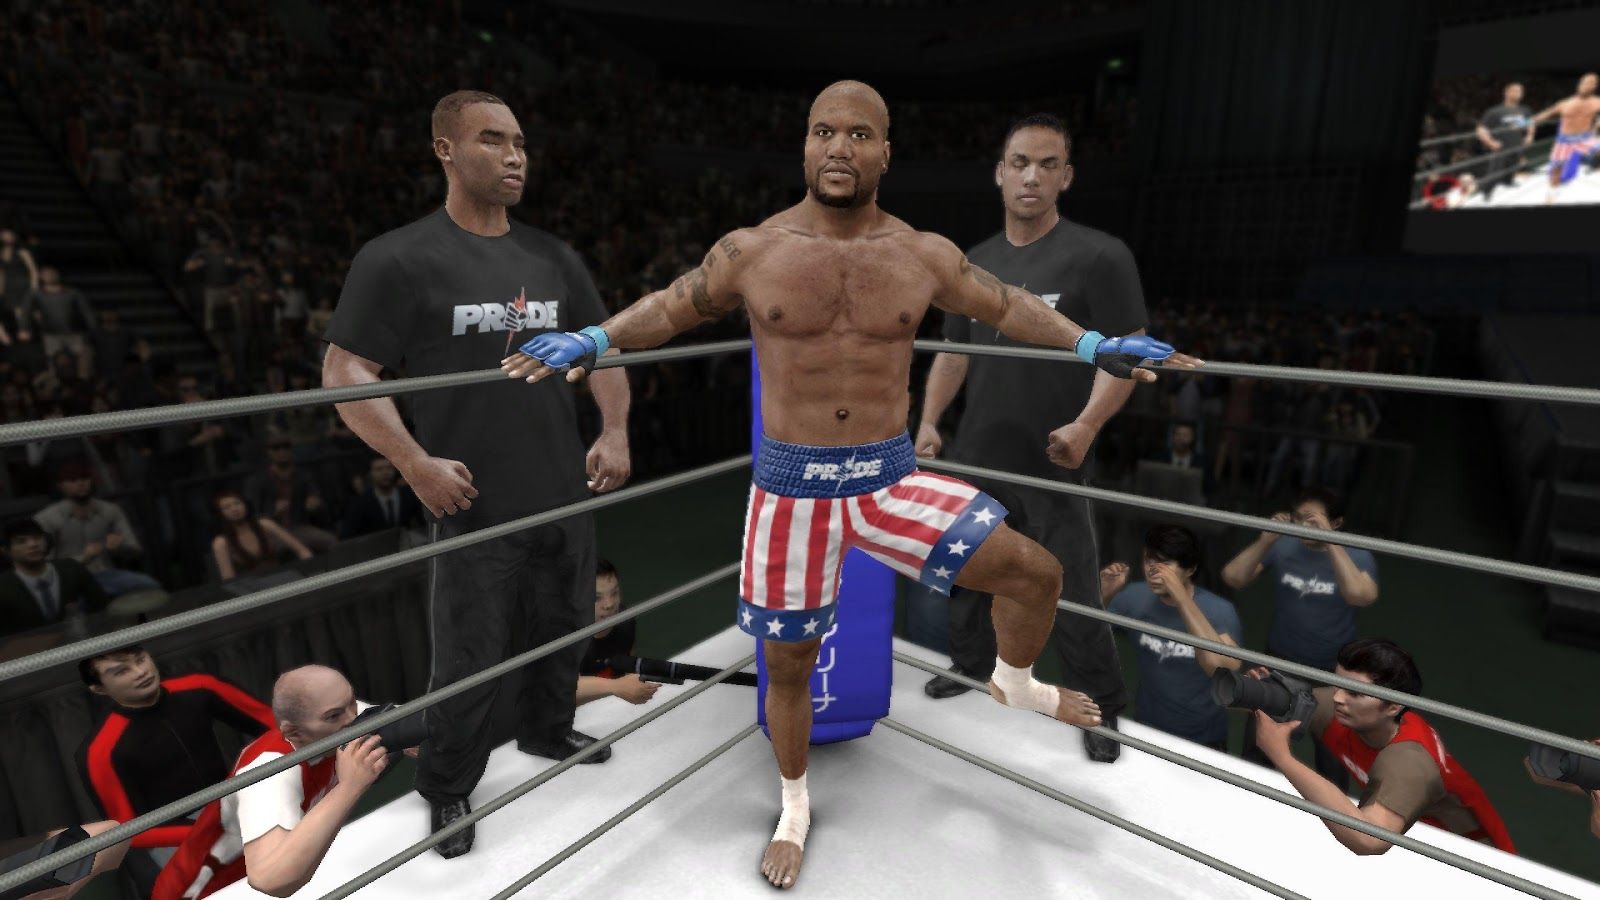 What could EA UFC 4 be like? Here is our ultimate EA UFC 4 dream